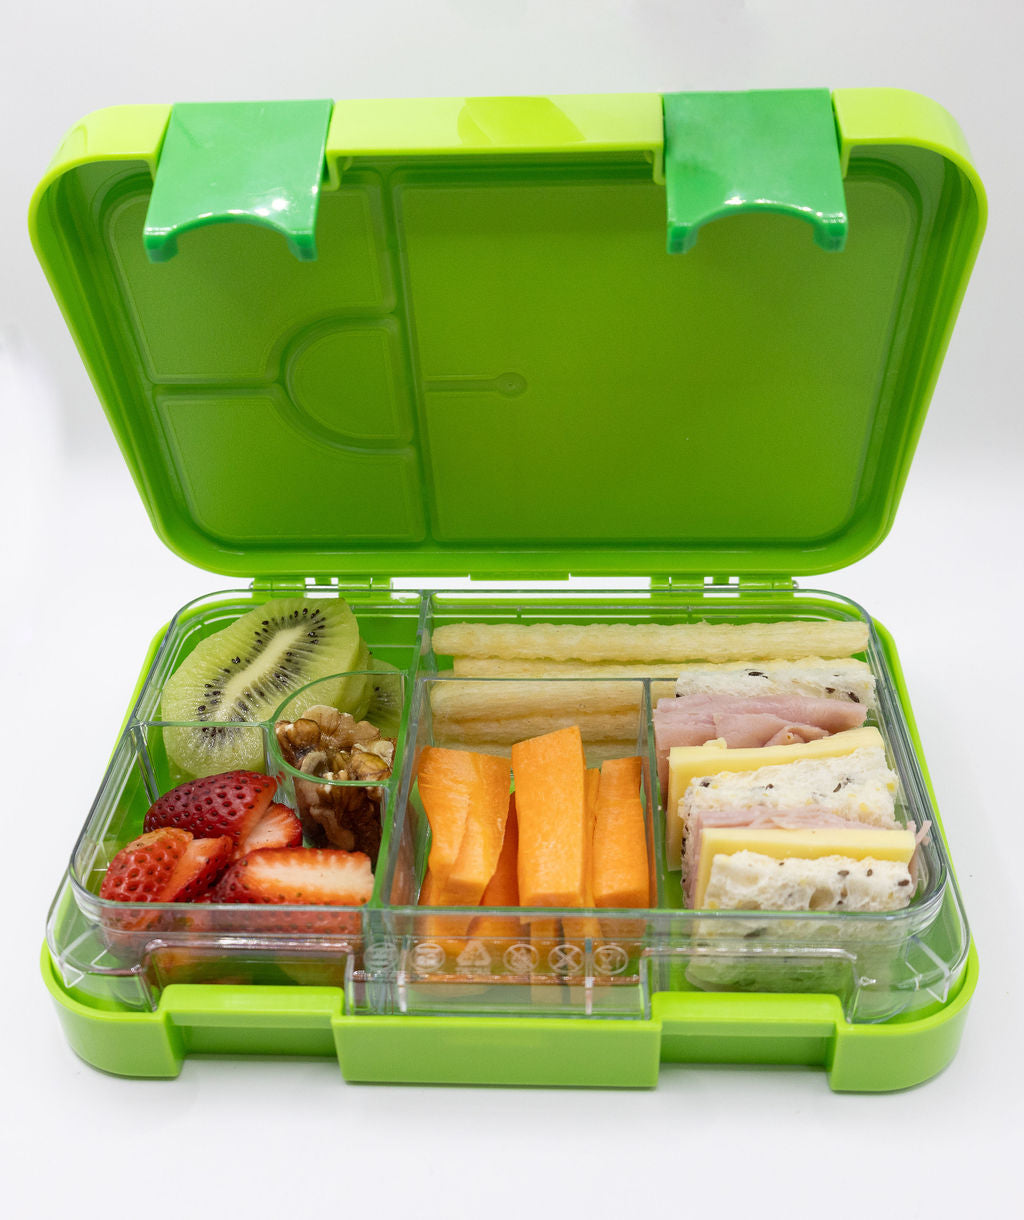 Noonys bailey bento lunchbox - lime green filled with lunch items